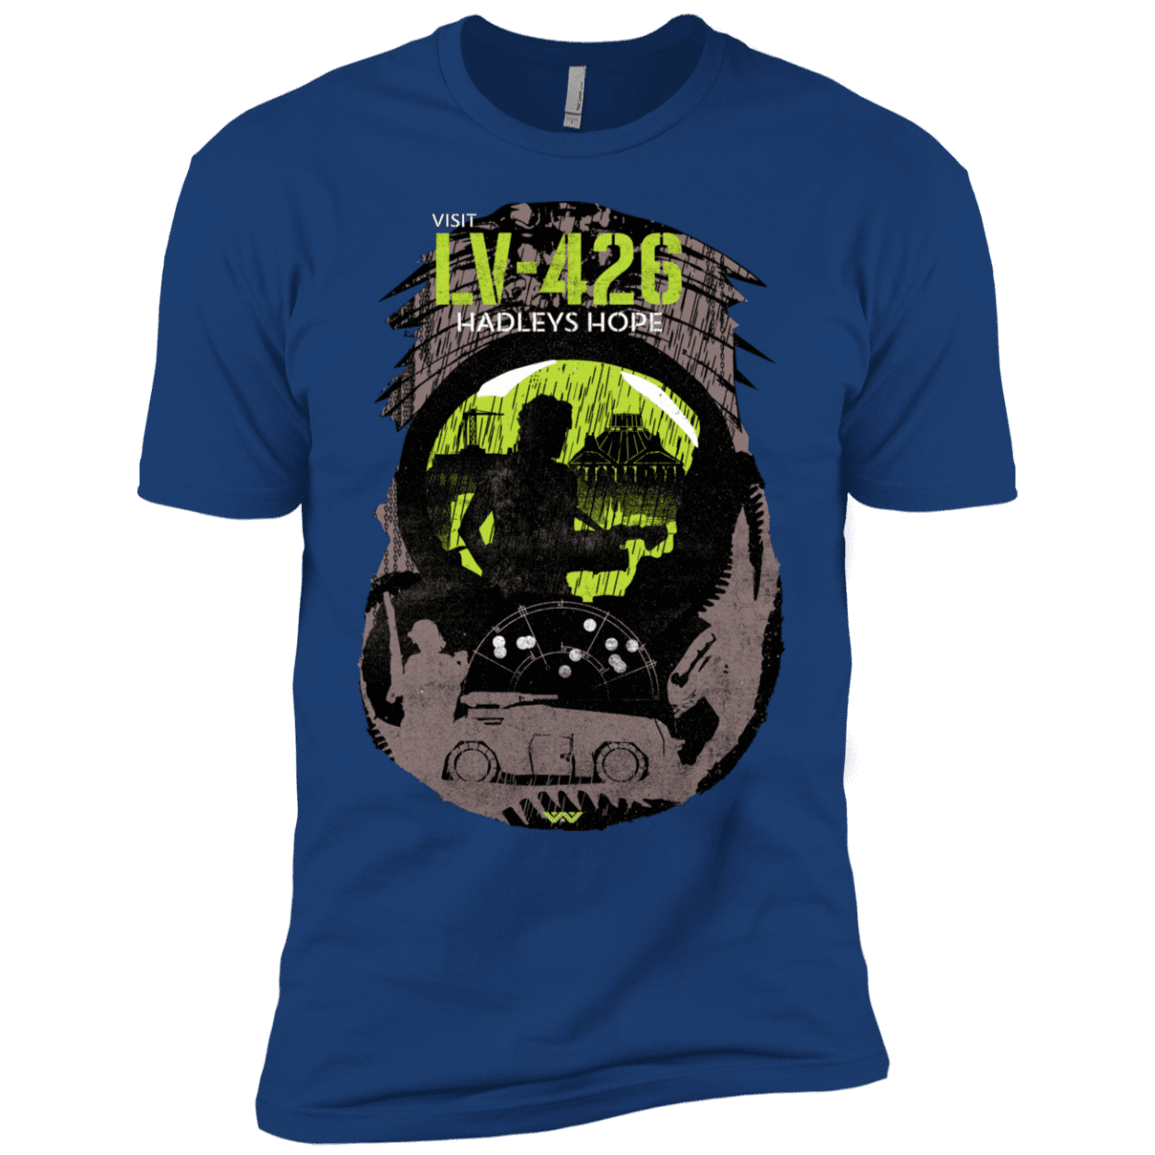 I Went to Lv-426 and All I Got Was This Lousy Teeshirt Women's T-Shirt